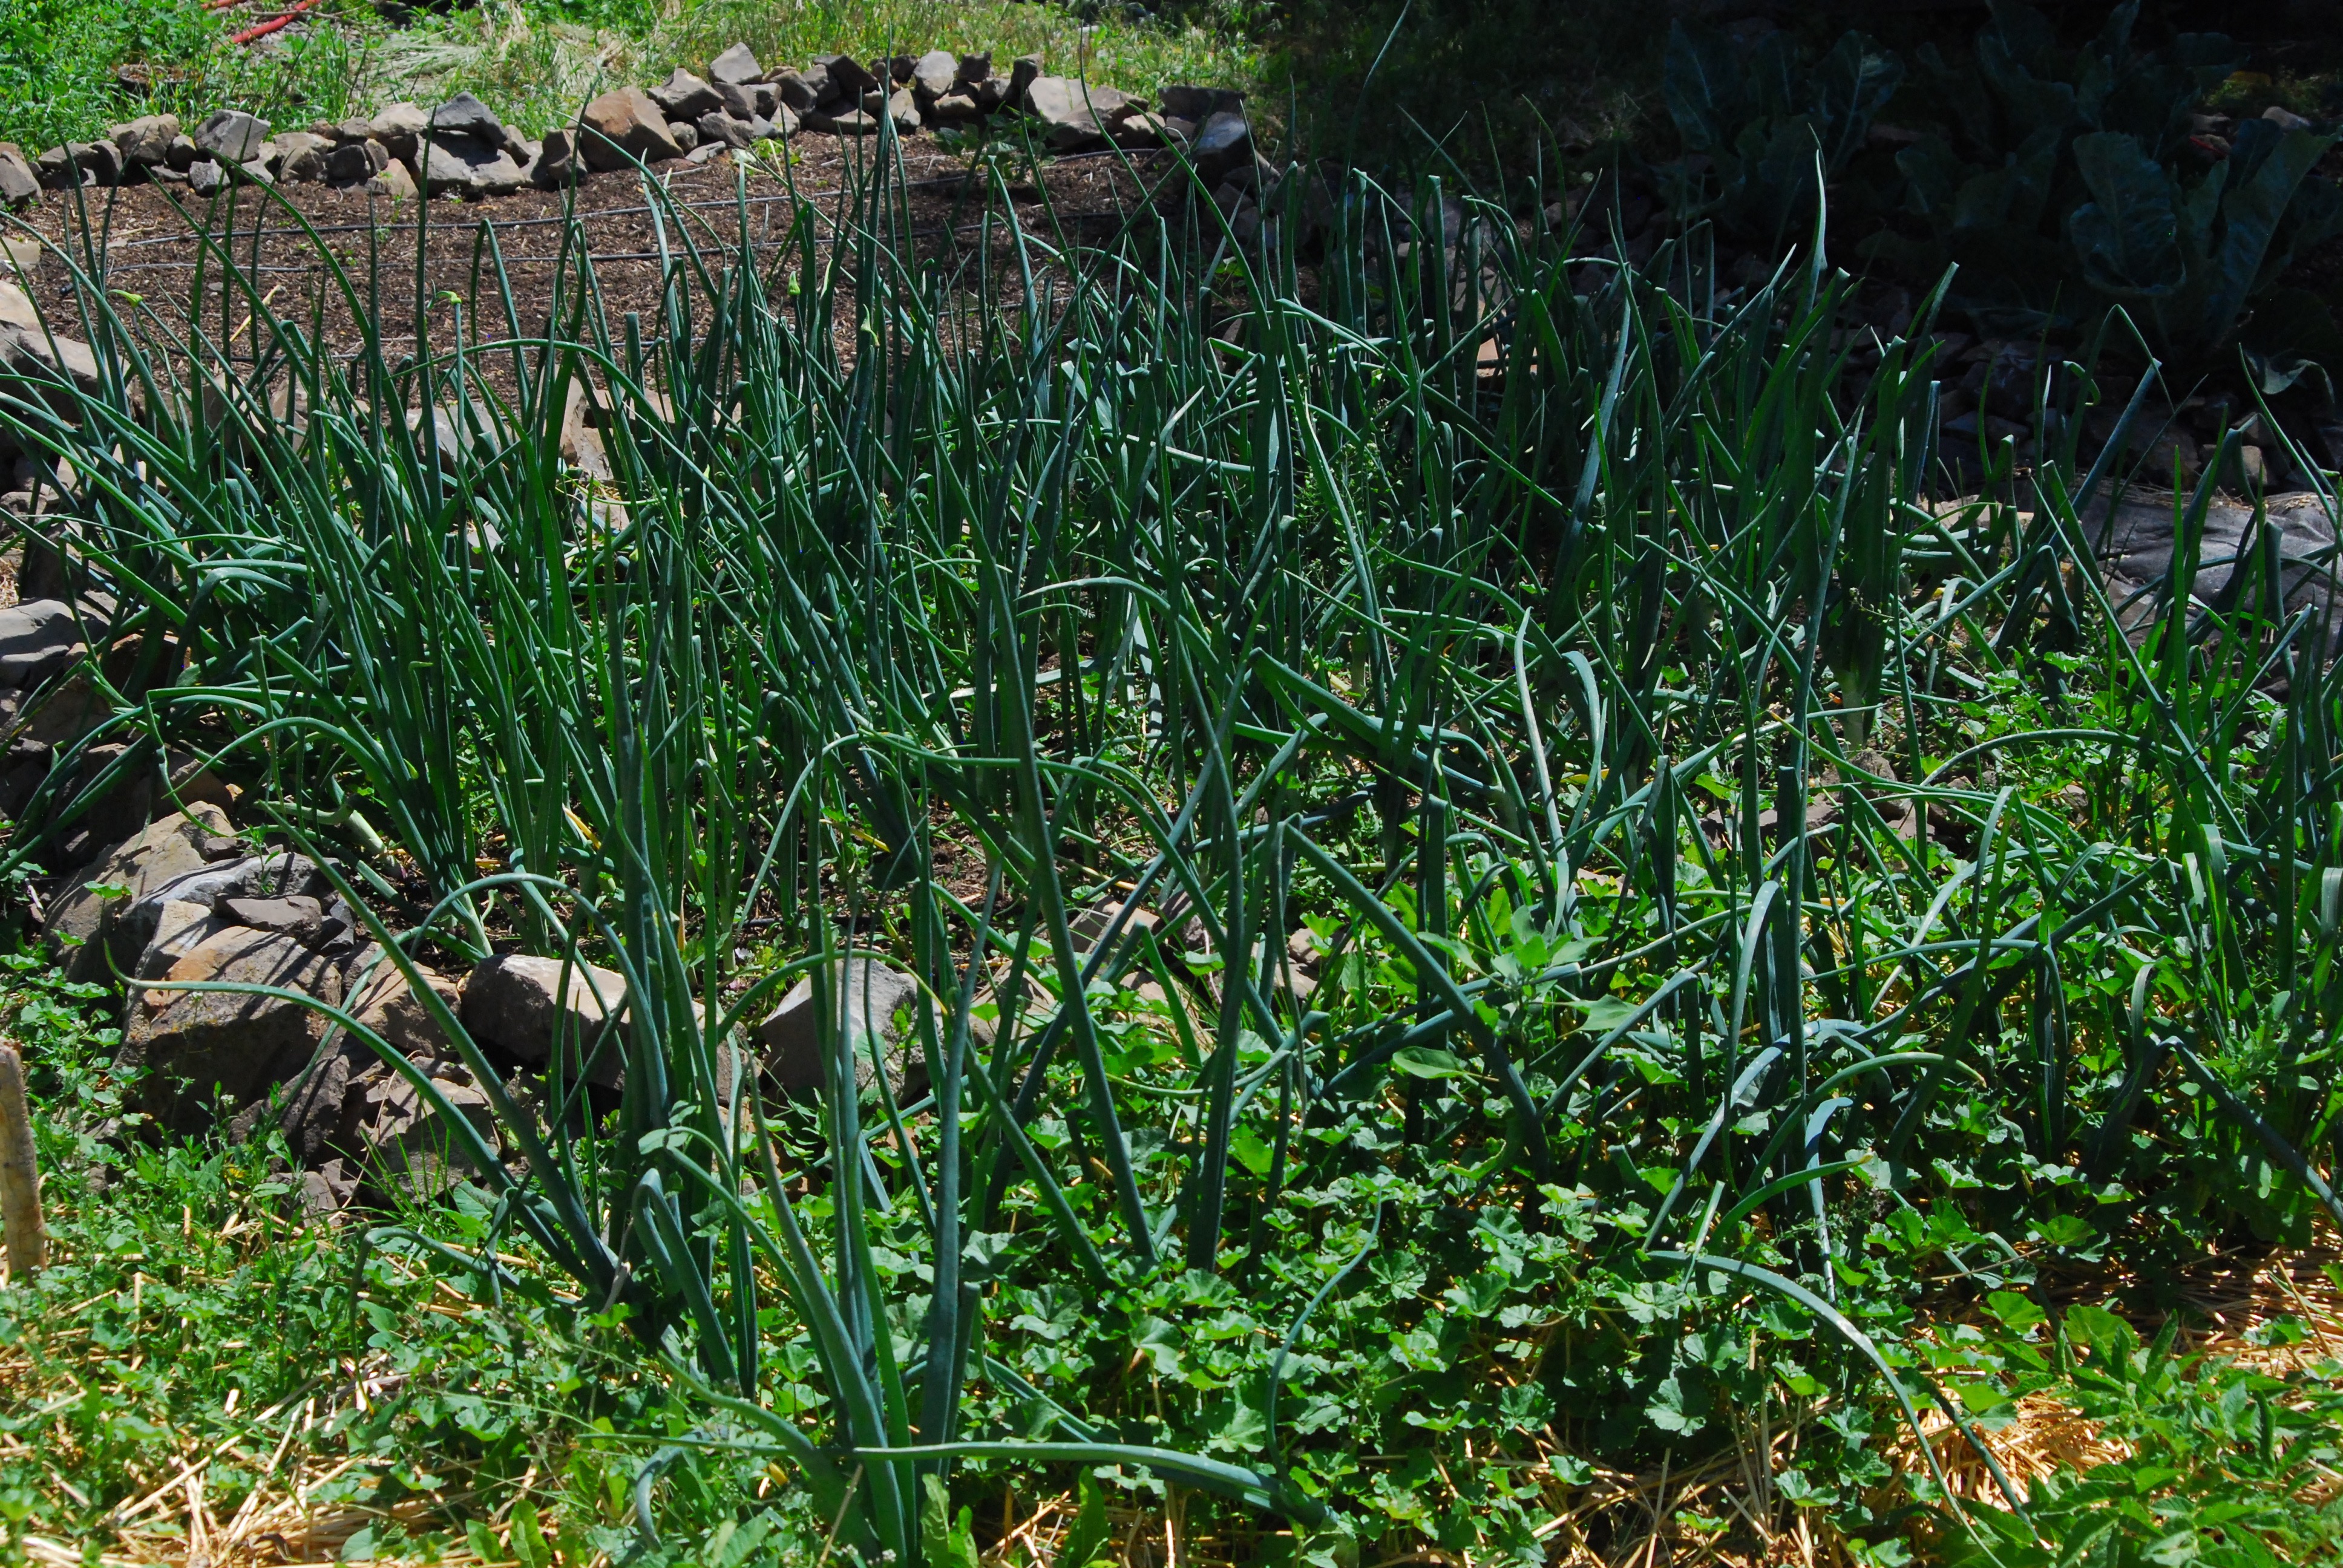 Onions in the Garden